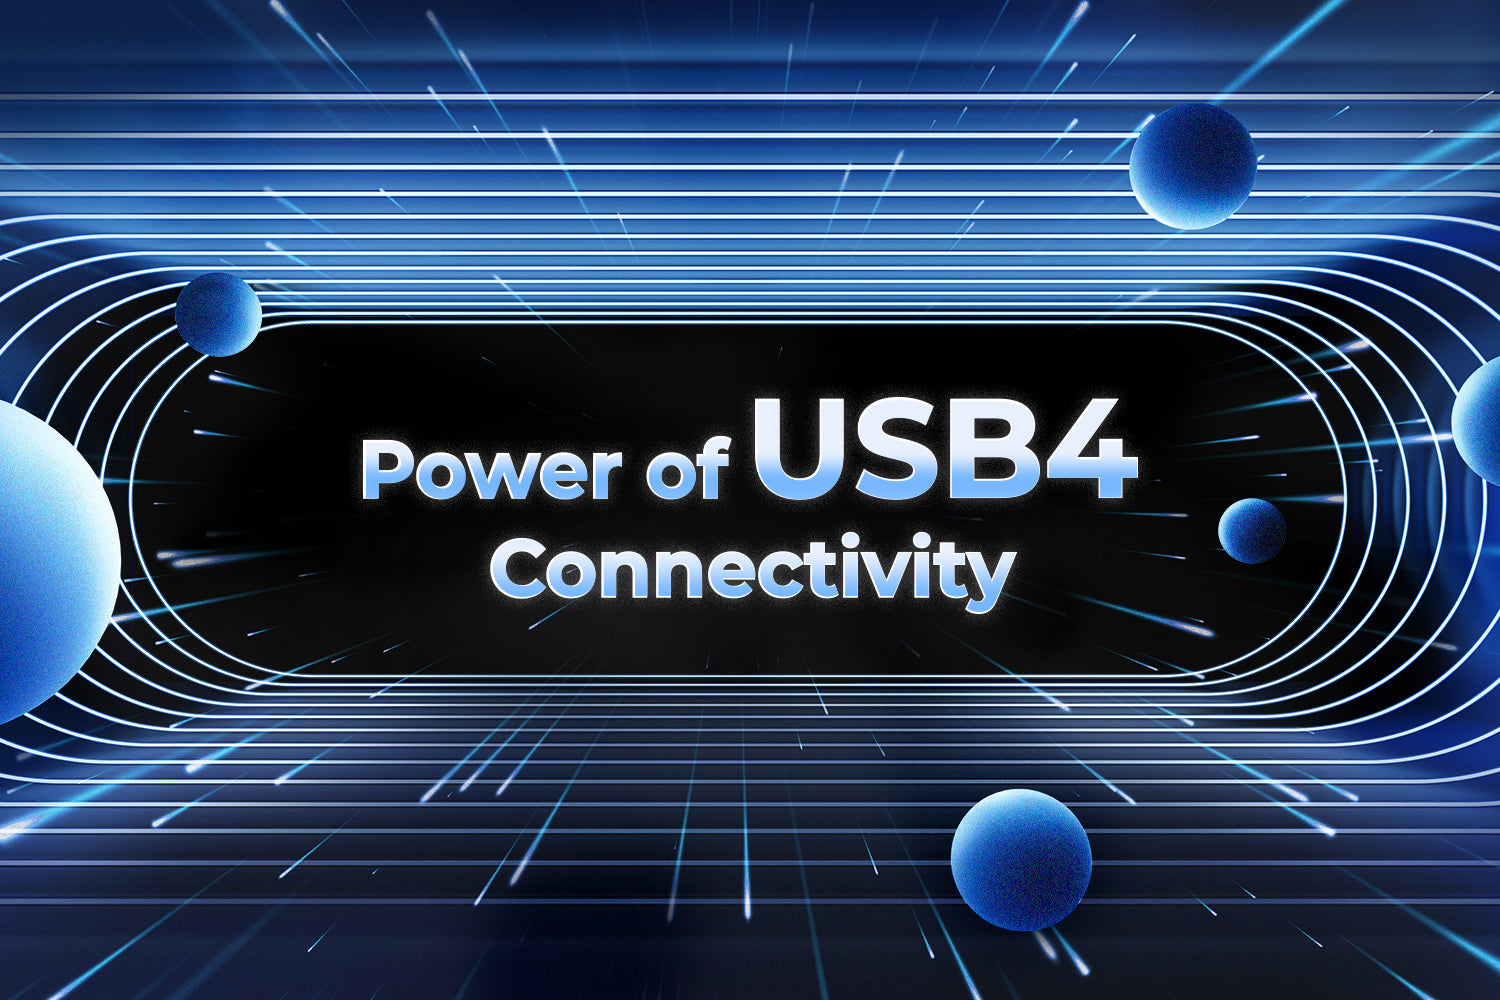 Feel the Revolutionary USB4 - the Power of Connectivity